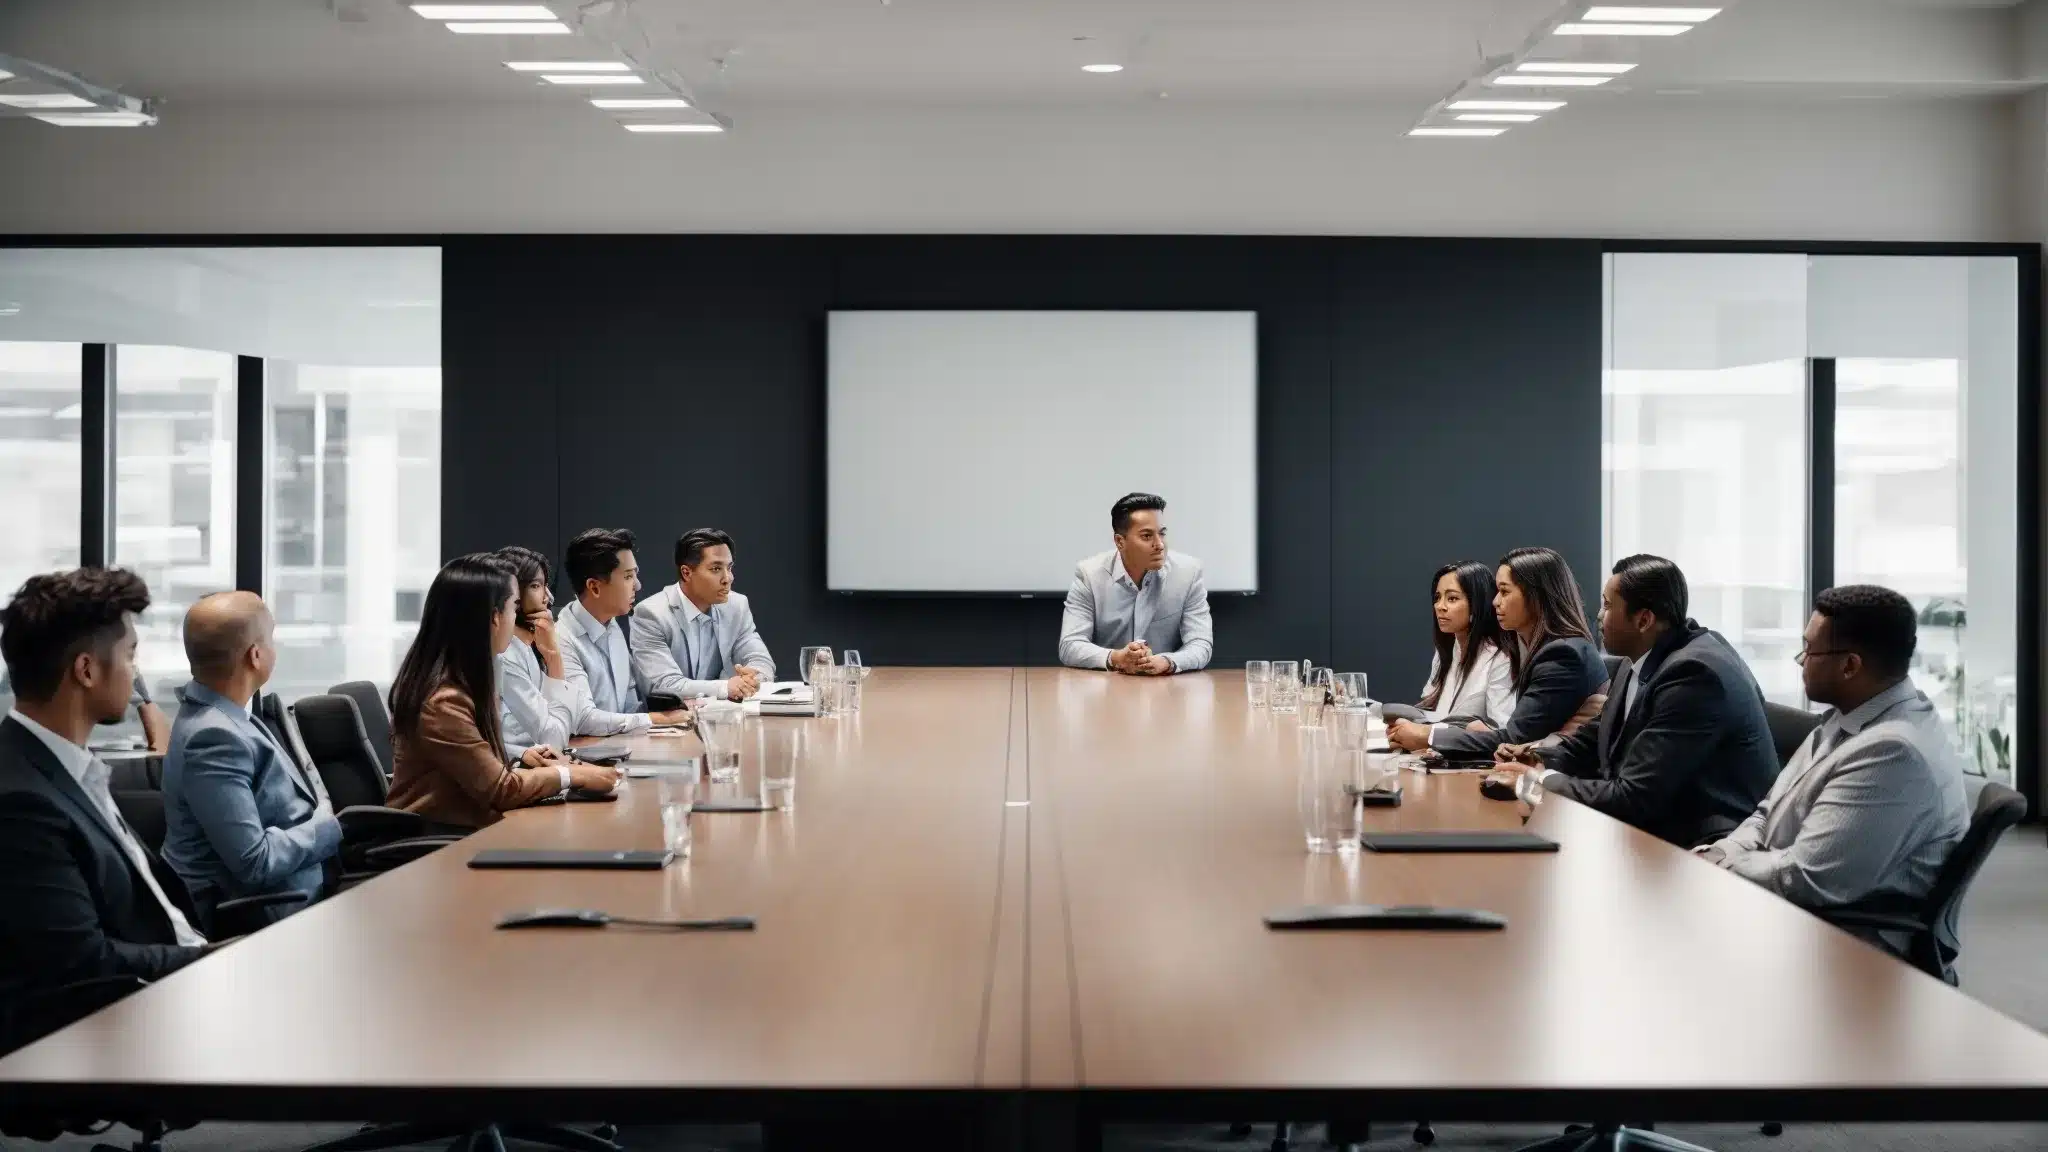 A Smooth, Modern Conference Room With Marketing Professionals Gathered Around A Sleek Table, Brainstorming Ideas On A Large Whiteboard.